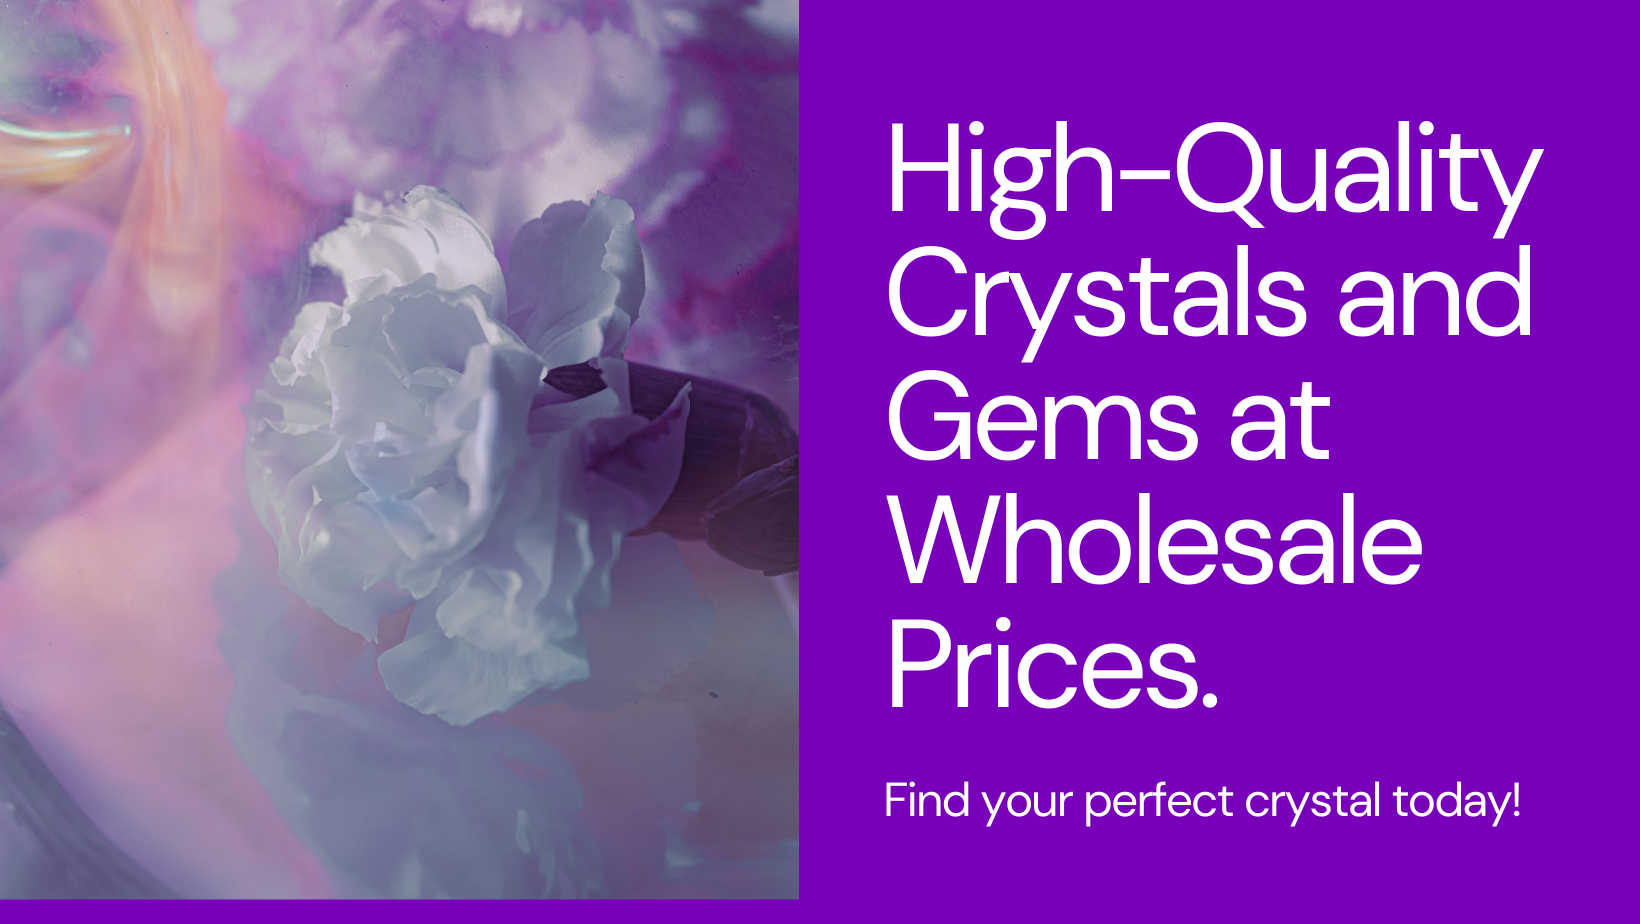 Wholesale Crystals And Gems Suppliers Near Me